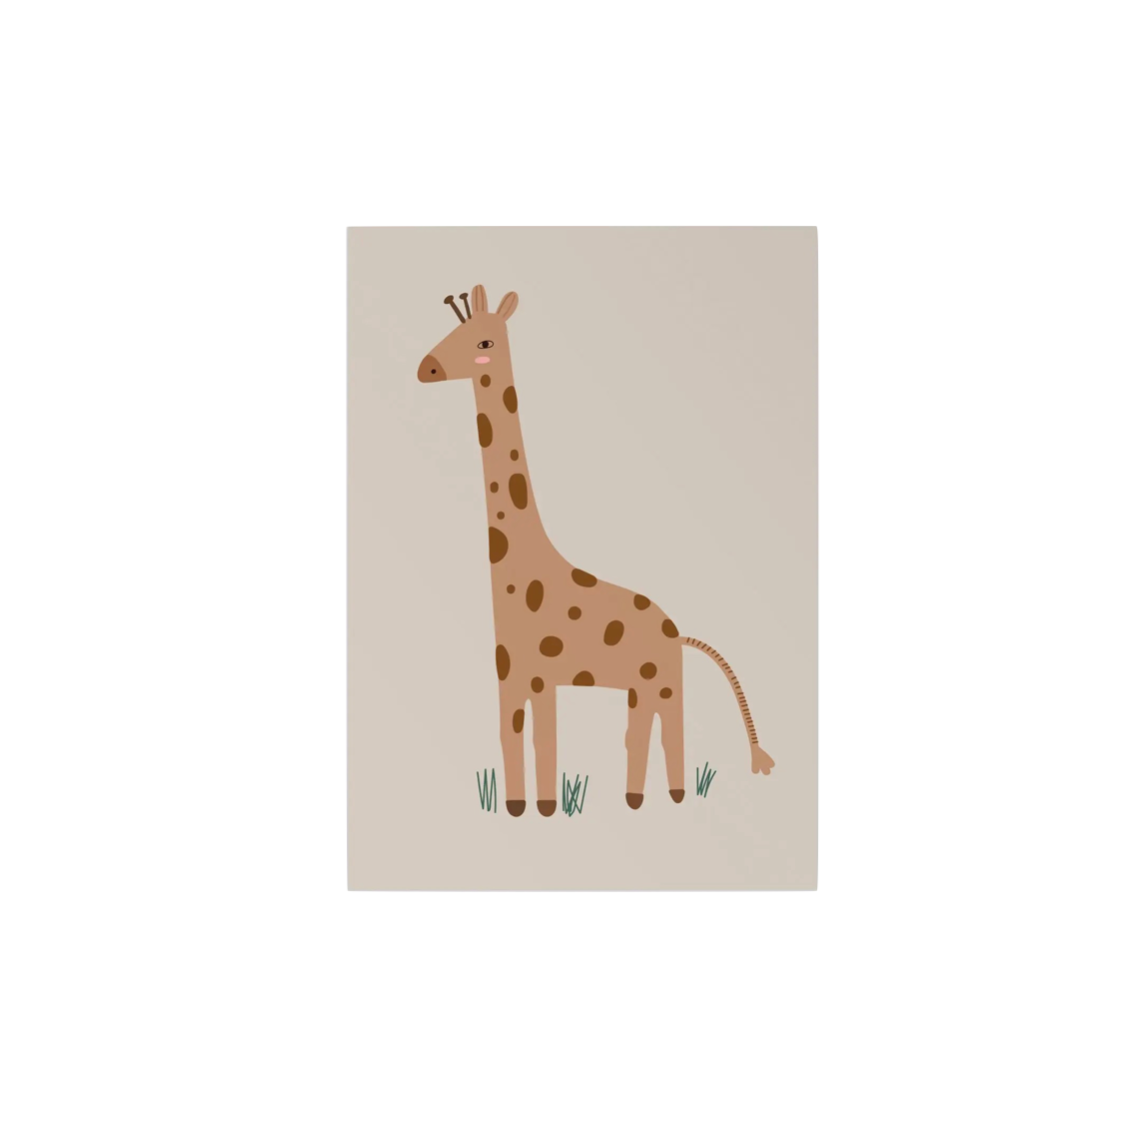 childrens print of an illustrated giraffe, on an oat coloured background with sprigs of green grass around its legs